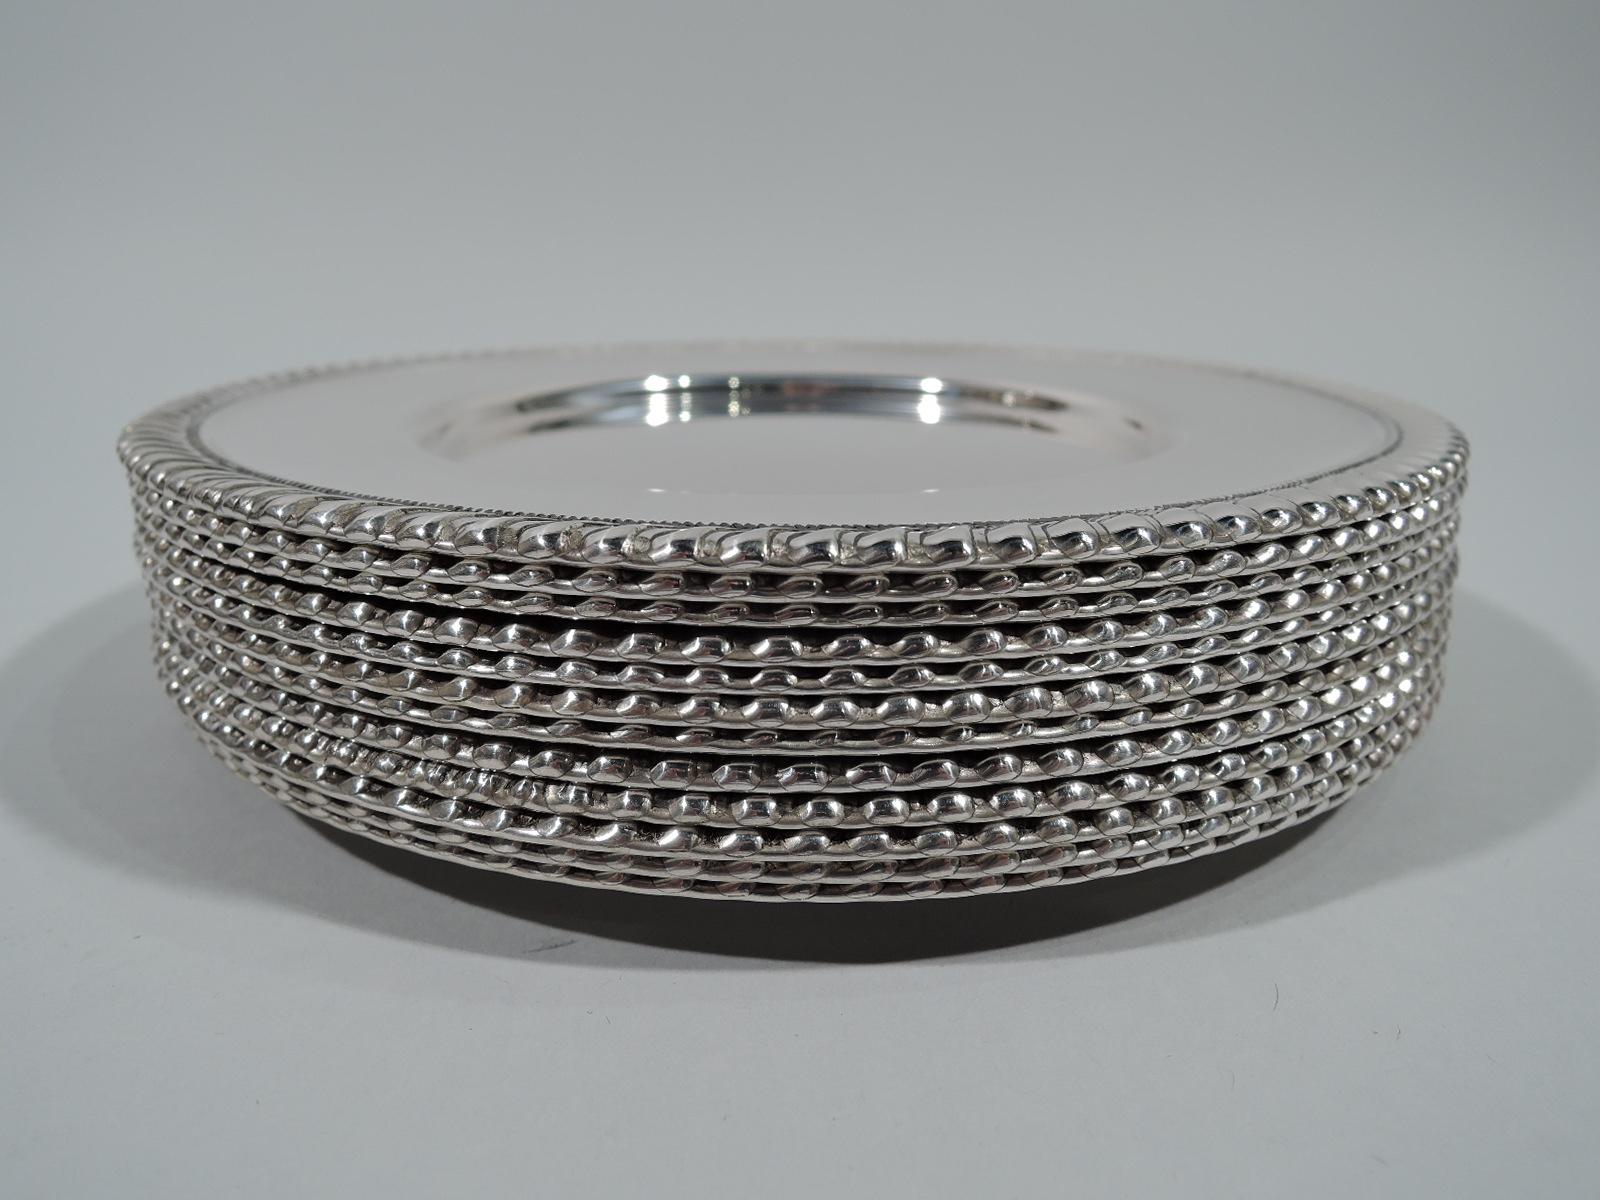 Set of 12 American sterling silver bread and butter plates, circa 1920. Each: Well with tapering shoulder and gadrooned rim. Hallmarked “Sterling”. Heavy total weight: 49.2 troy ounces.